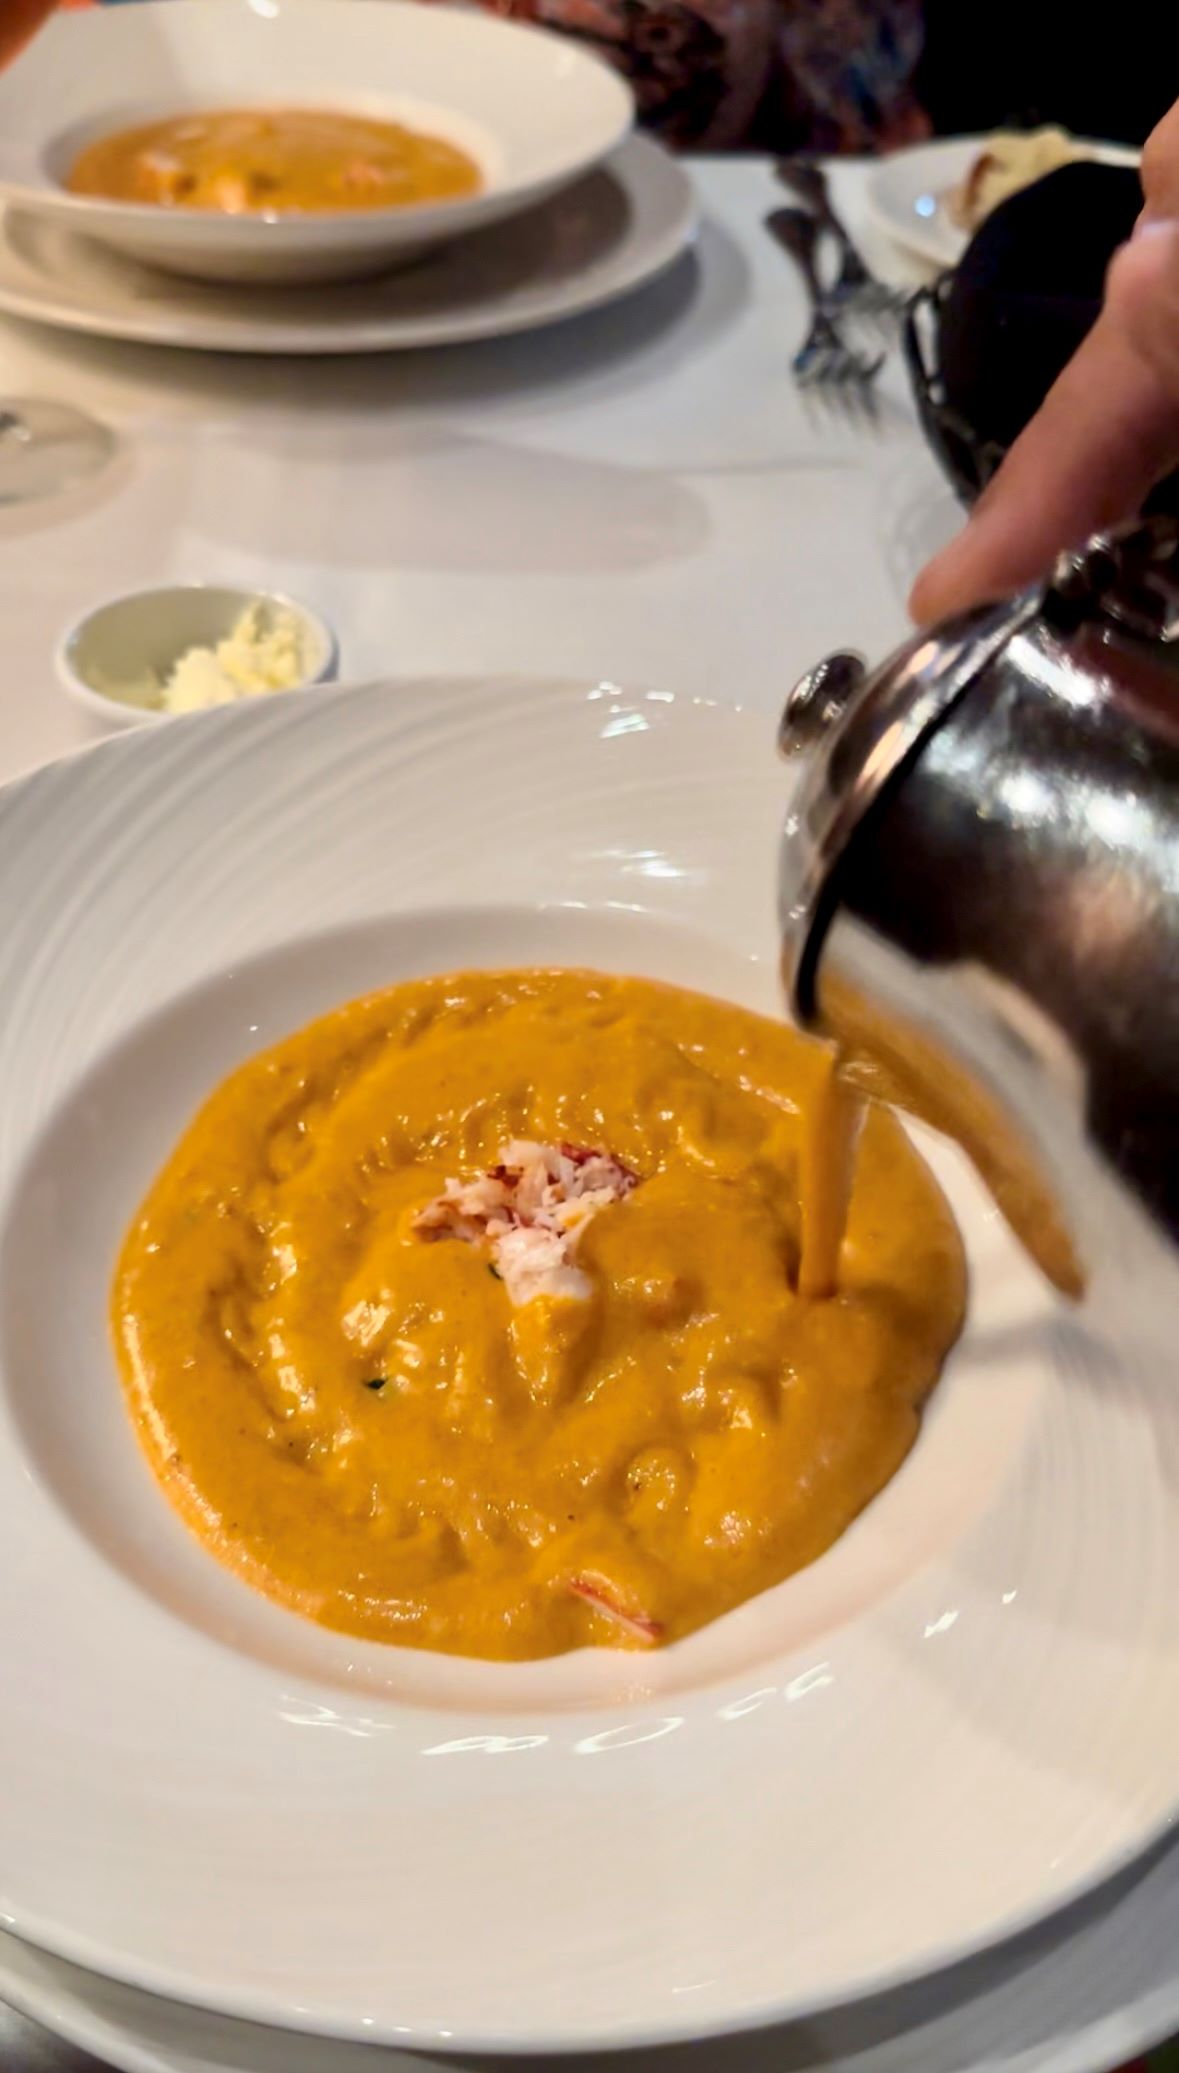 An image of the creamy Lobster Bisque.